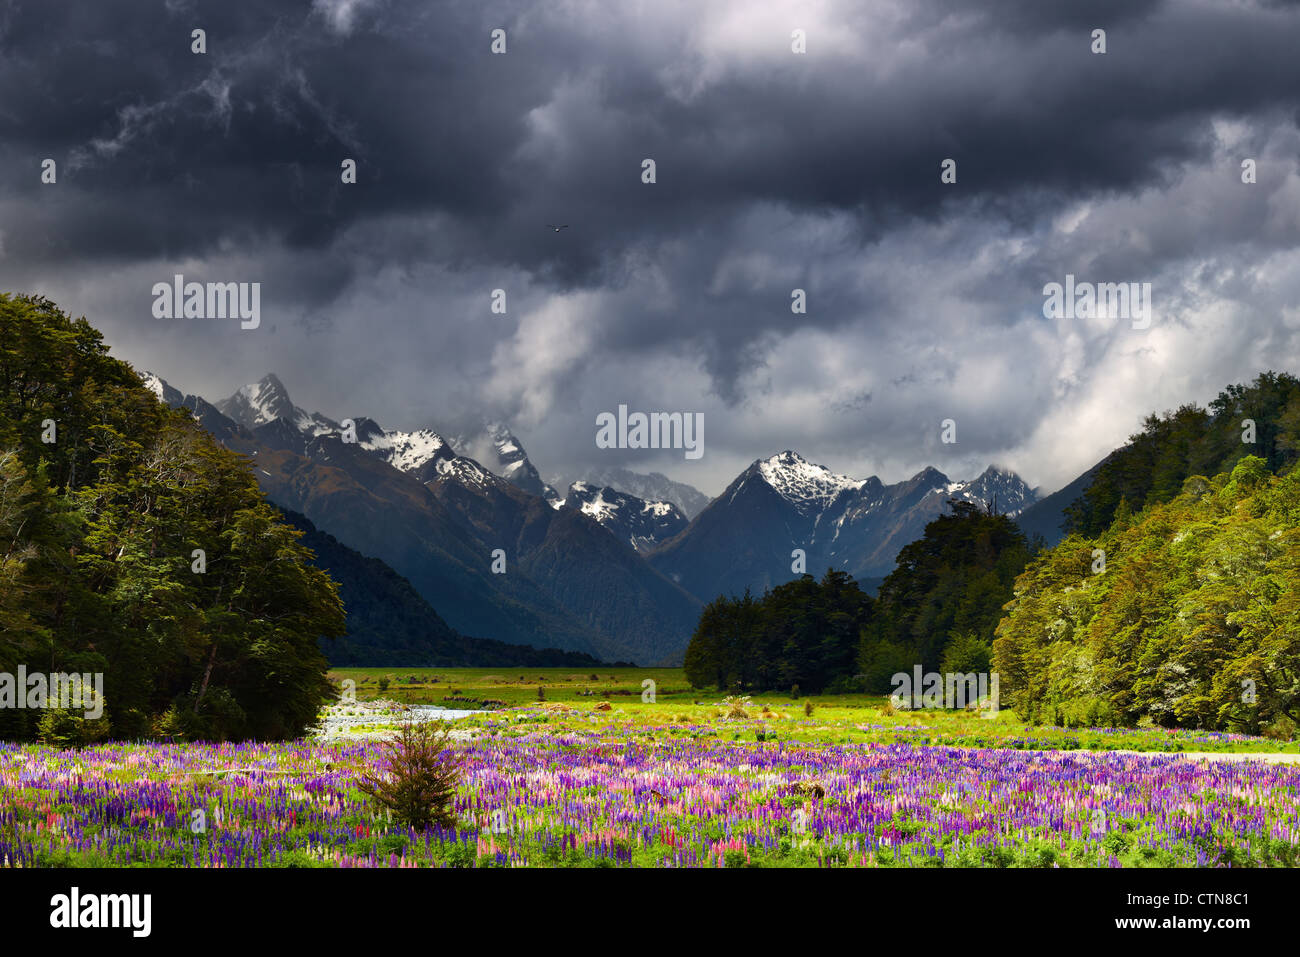 Mountain landscape with storm clouds, New Zealand Stock Photo